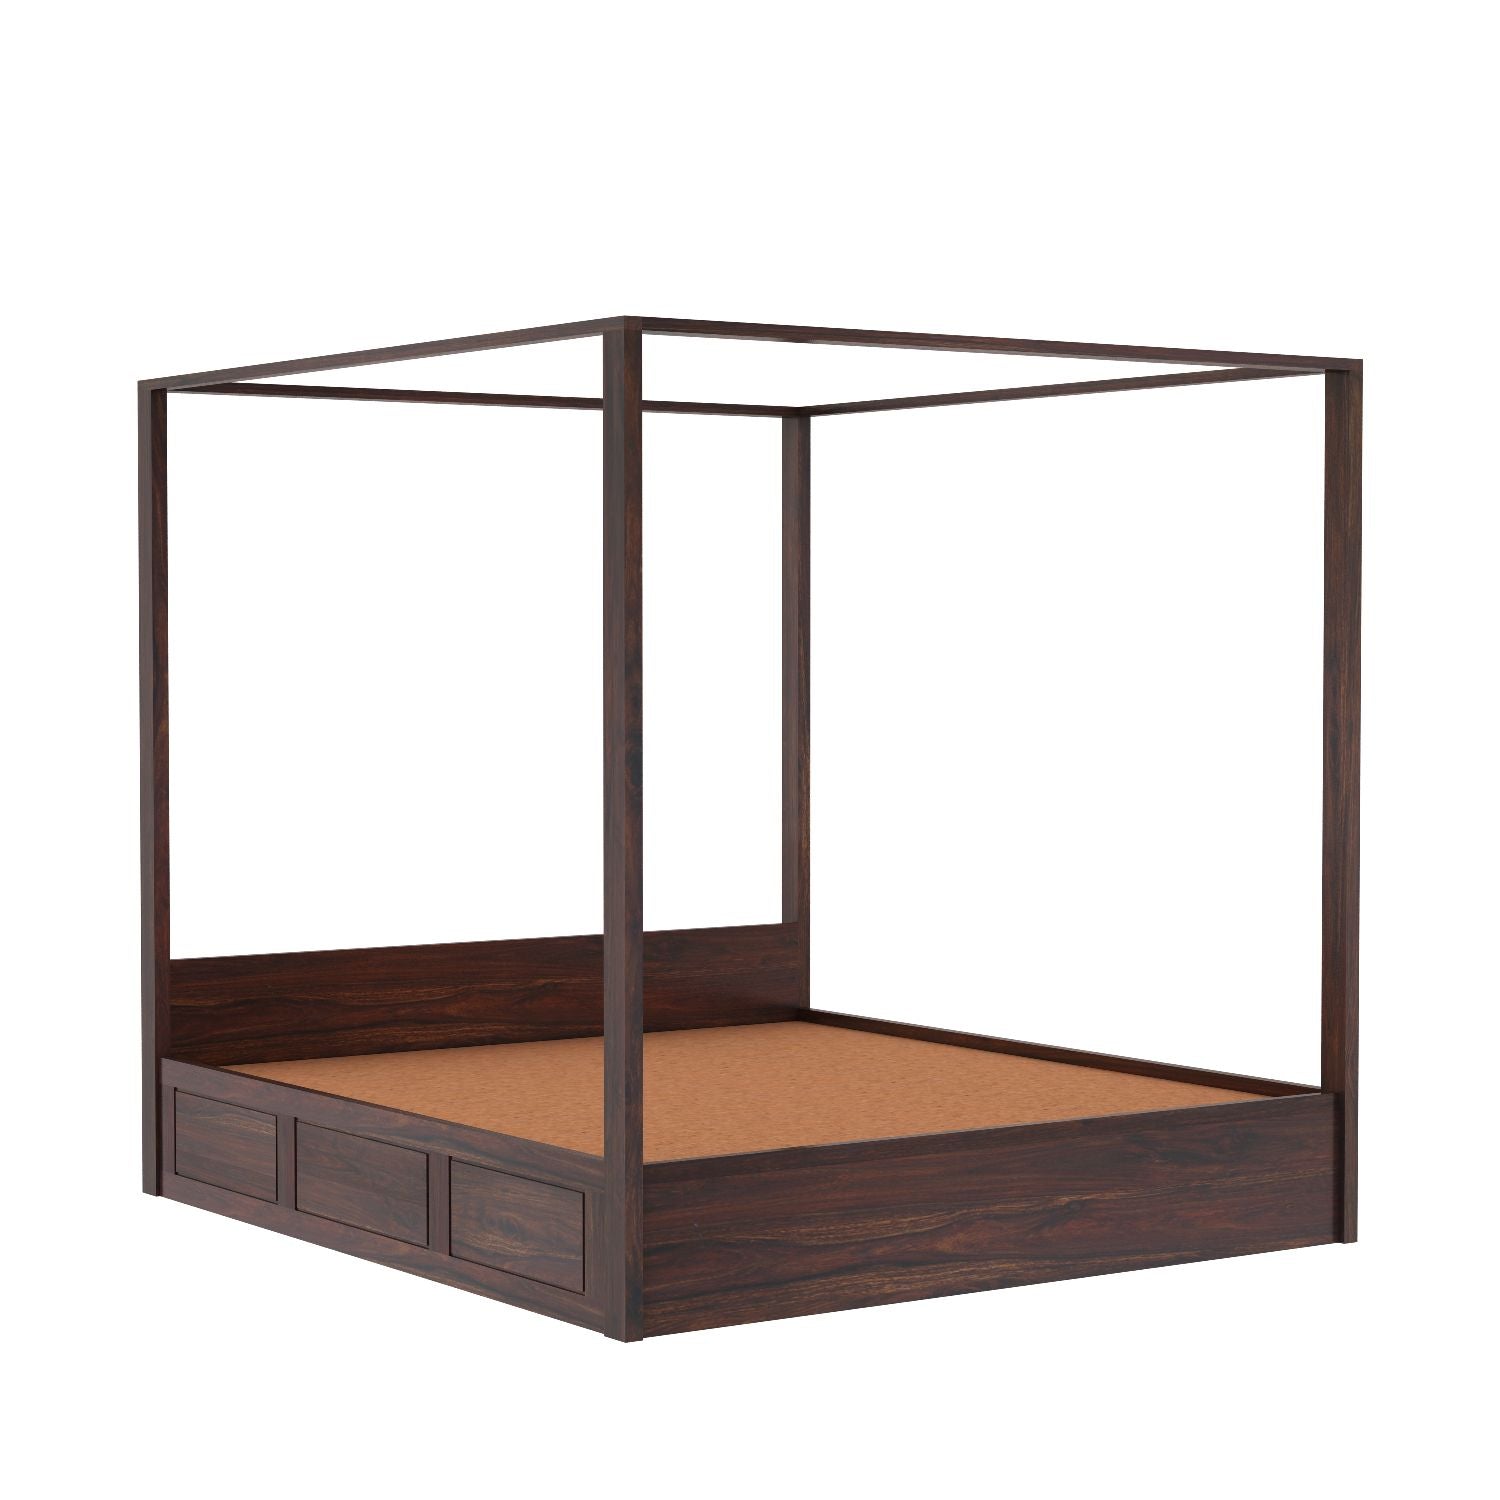 Solivo Solid Sheesham Wood Hydraulic Poster Bed With Box Storage (King Size, Walnut Finish)